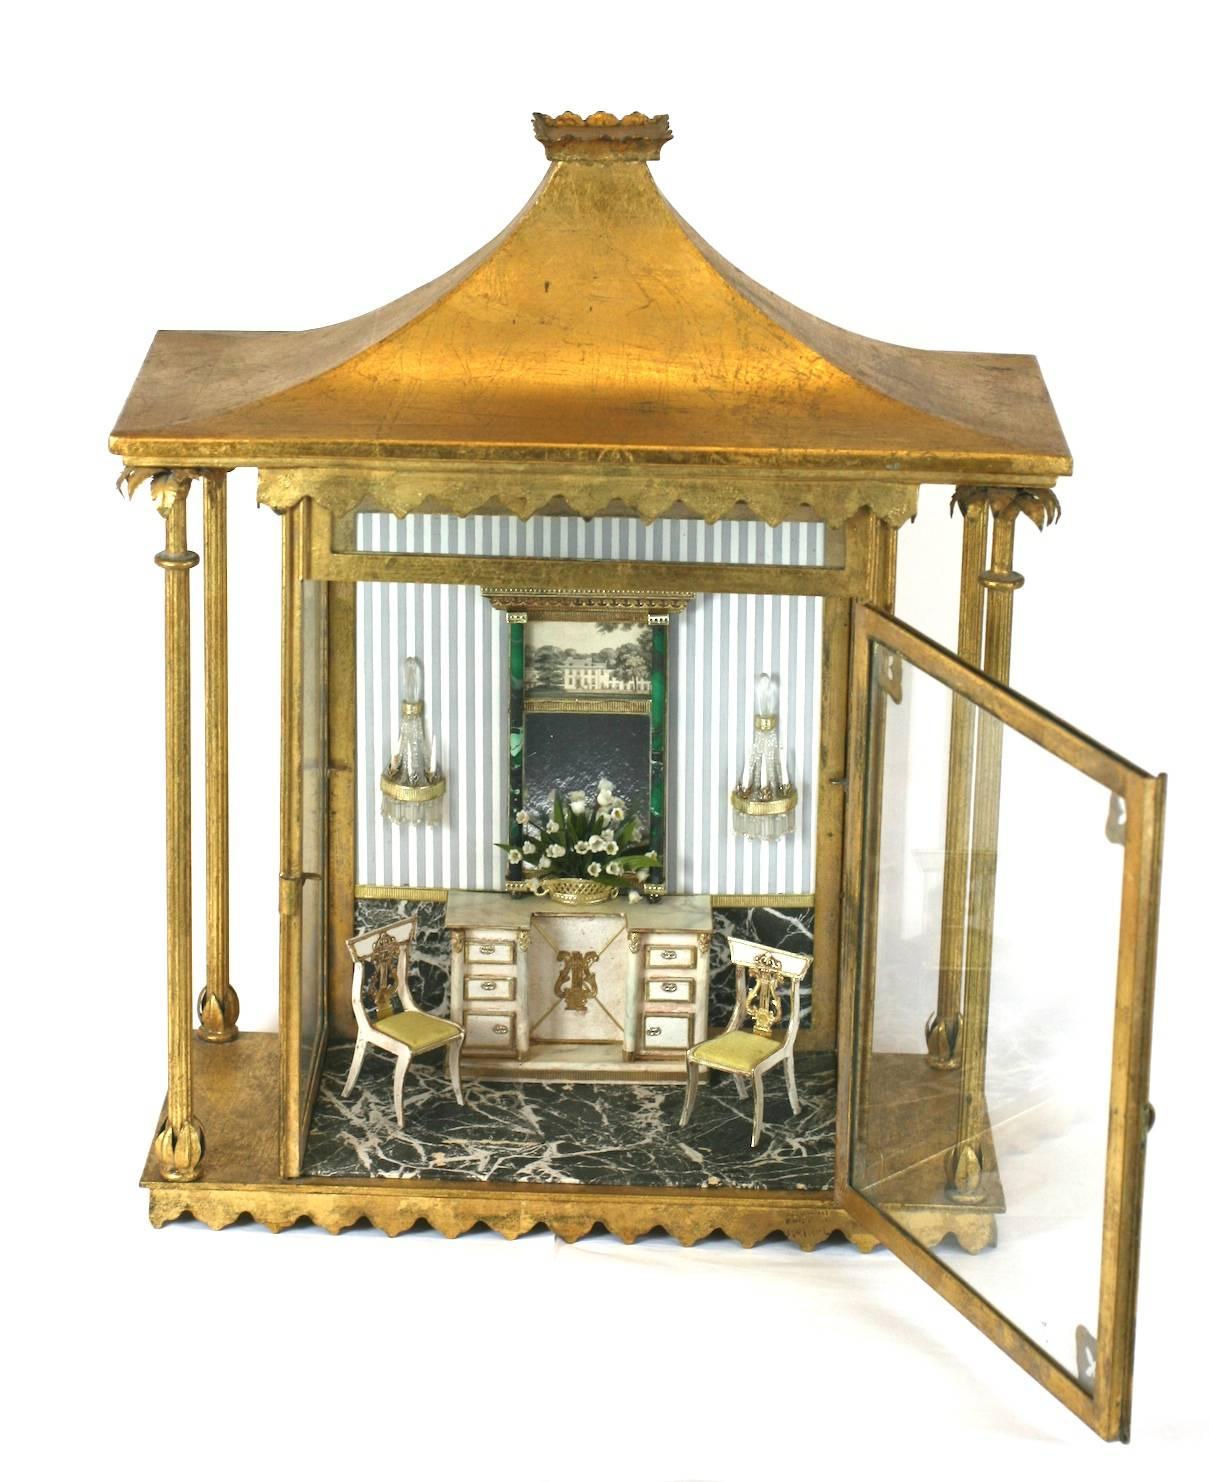 Gilt tole wall diorama with finely detailed period interior. Chairs, mantel, floor and decorations are all finely crafted from hand-painted paper and are moveable. 
Gilded pagoda form roof with side columns capped with leafy gilt caps. Lovely